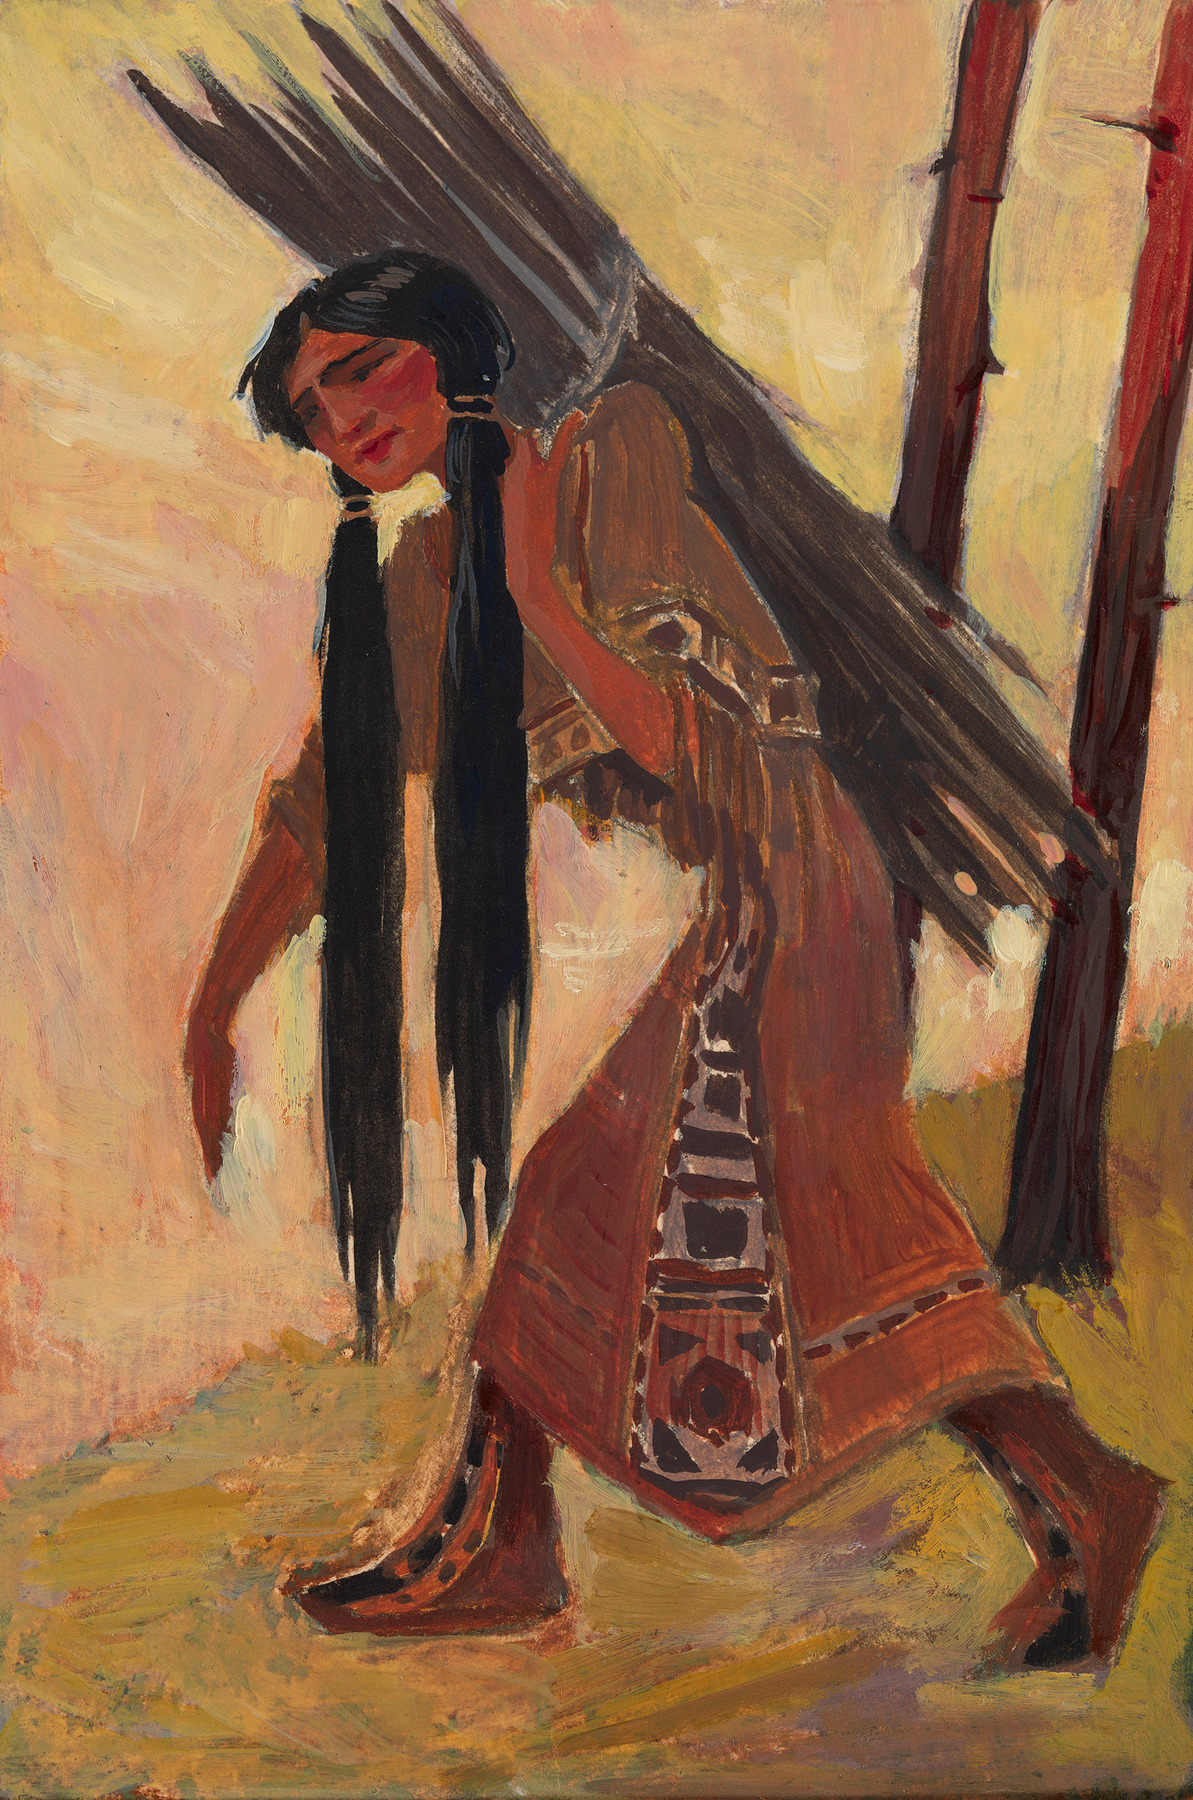 Indians, two works